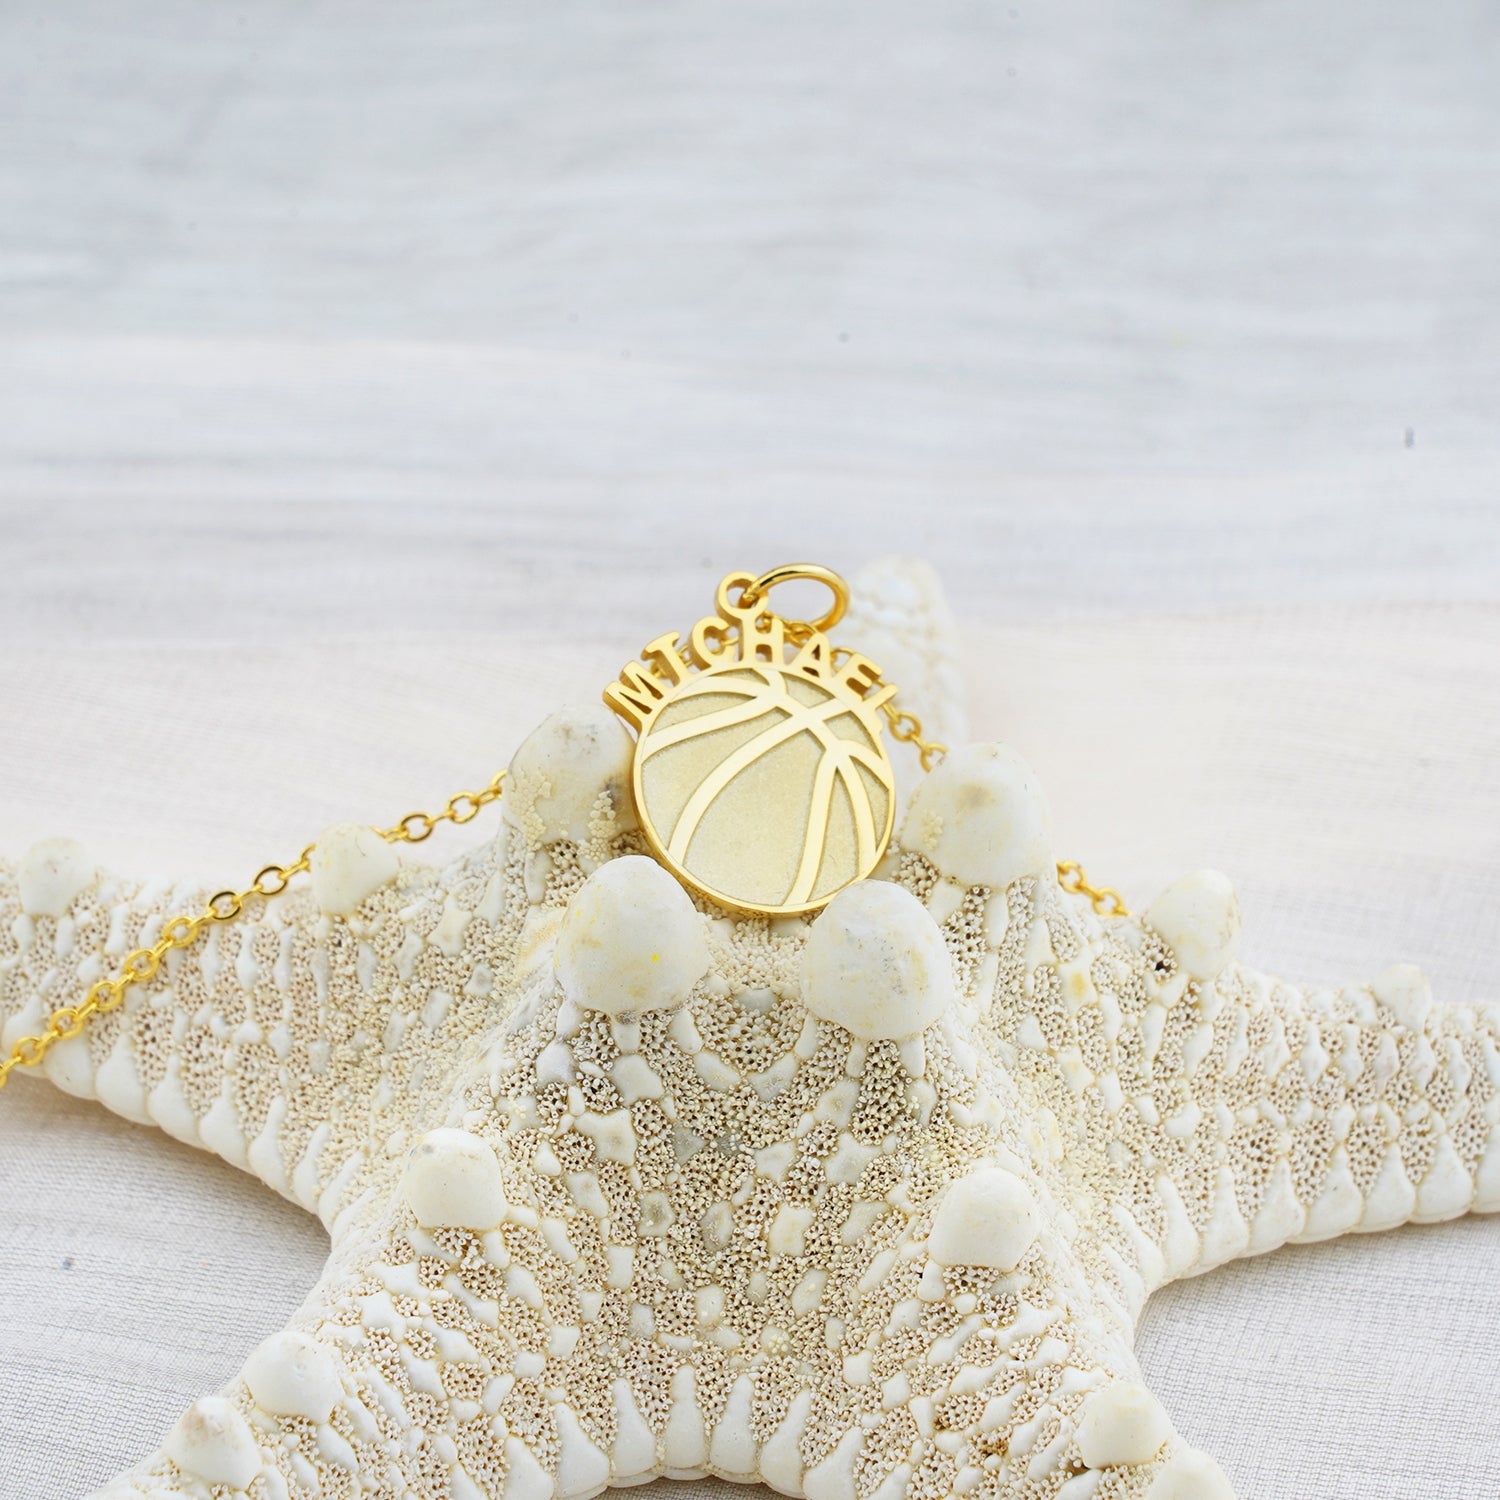 Personalized Basketball Baby Name Necklace